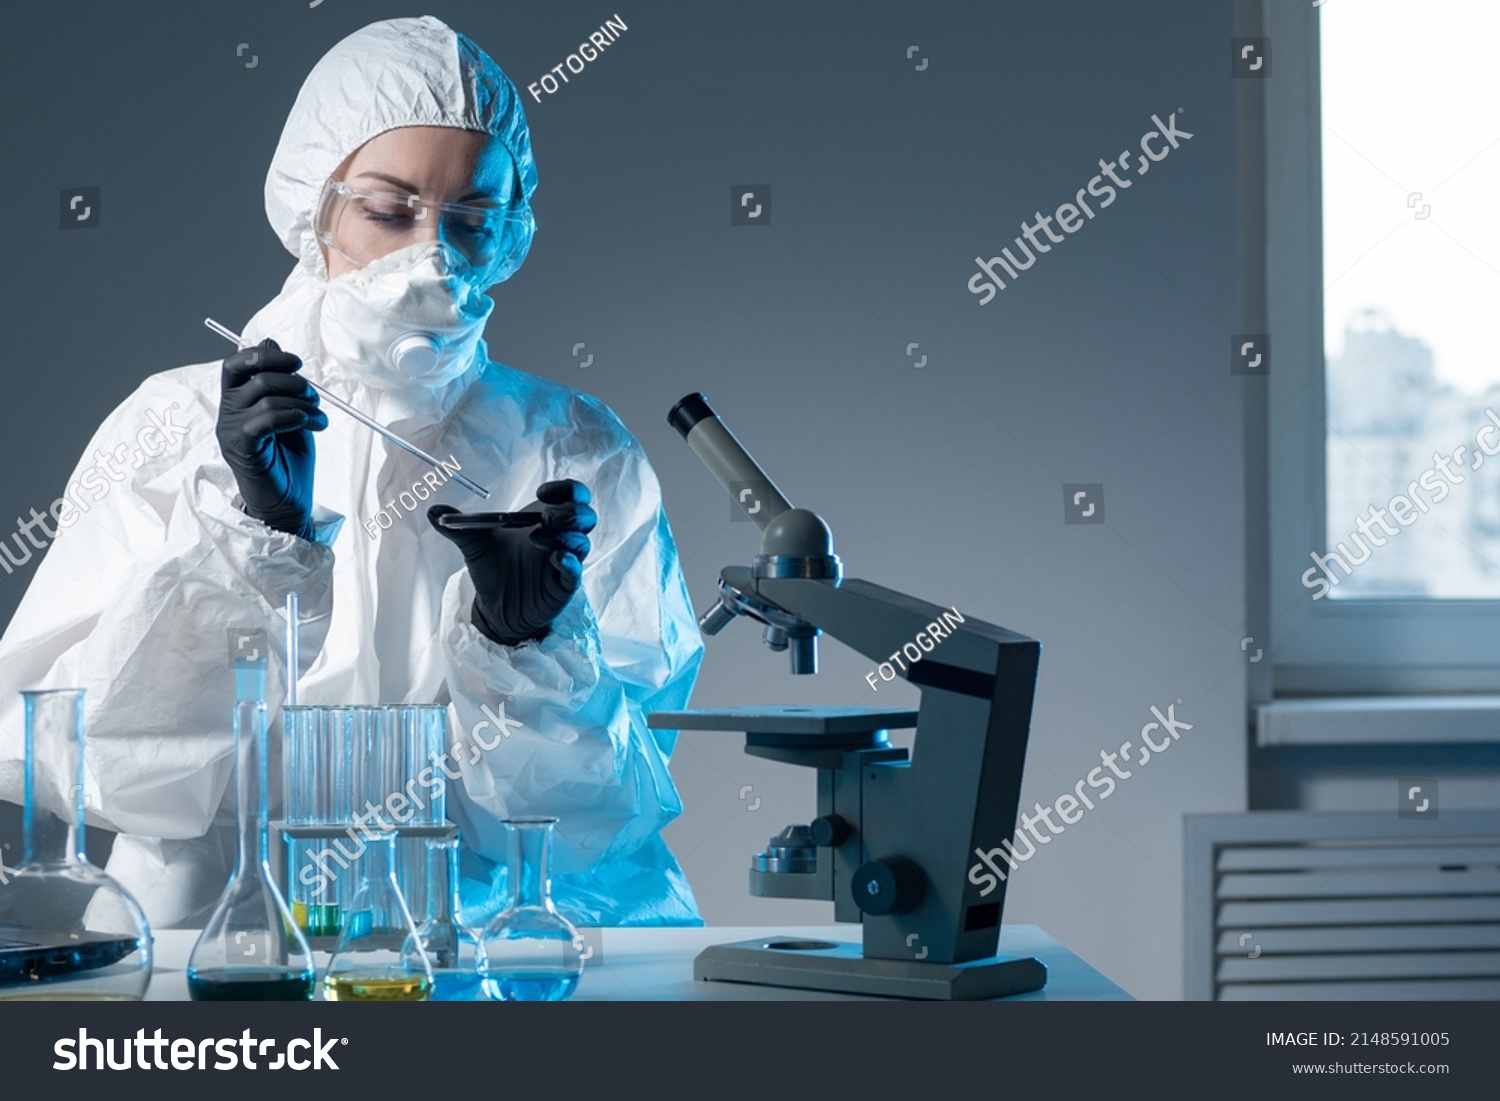 Dispersal of viruses. Member of Institute of Virology. Laboratory research of viruses. Doctor is engaged in dispersal of viruses. Medic in chemical protection suit. Microscope and tube in doctor hand #2148591005